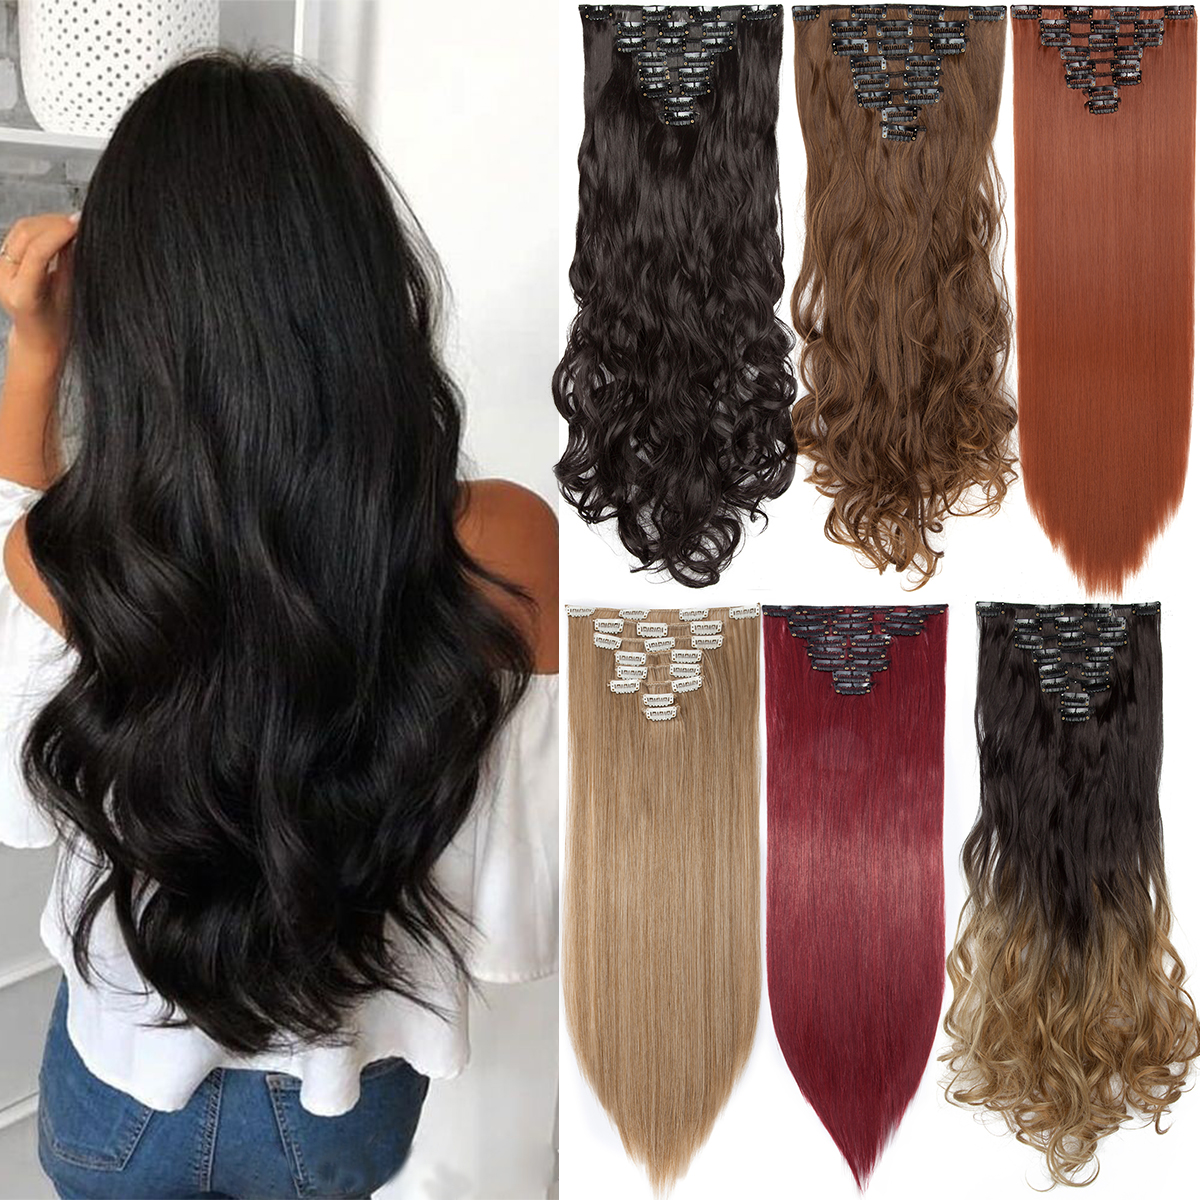 Benehair Clip in Hair Extensions Full Head Long Thick 8 Pieces Hair 18 Clips Curly Wavy Straight Hairpieces 100% Real Natural as Human Best Hair Set 17'' Curly Medium Brown - image 1 of 11